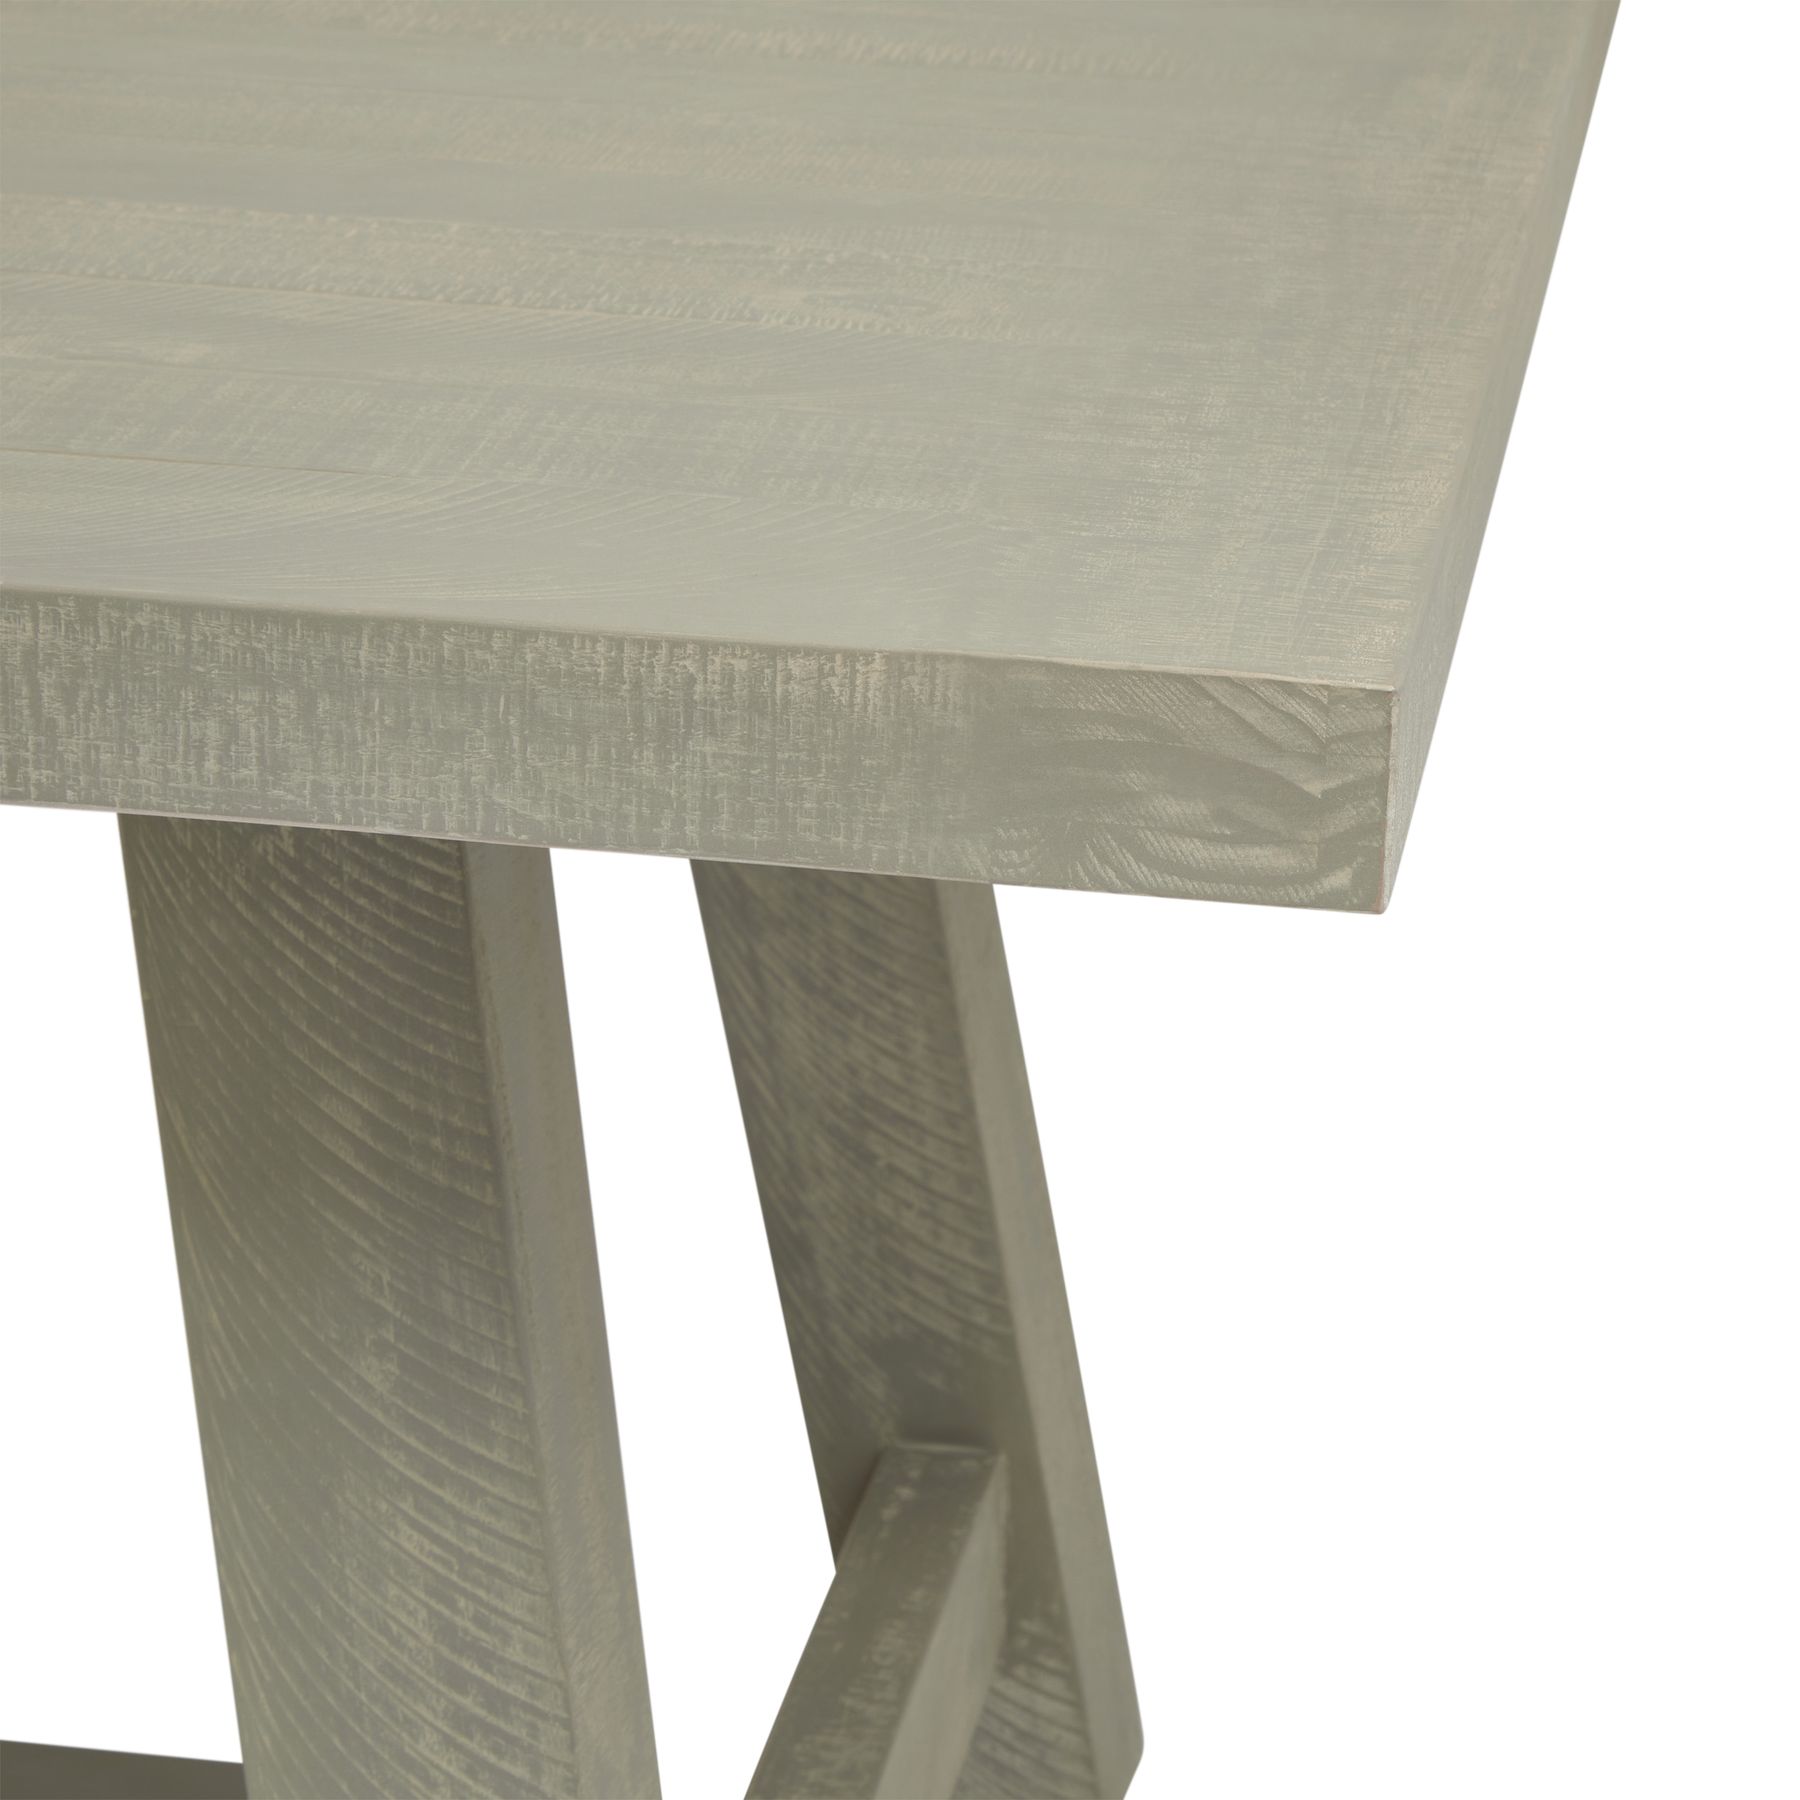 Saltaire Collection Rectangular Dining Table - Image 3